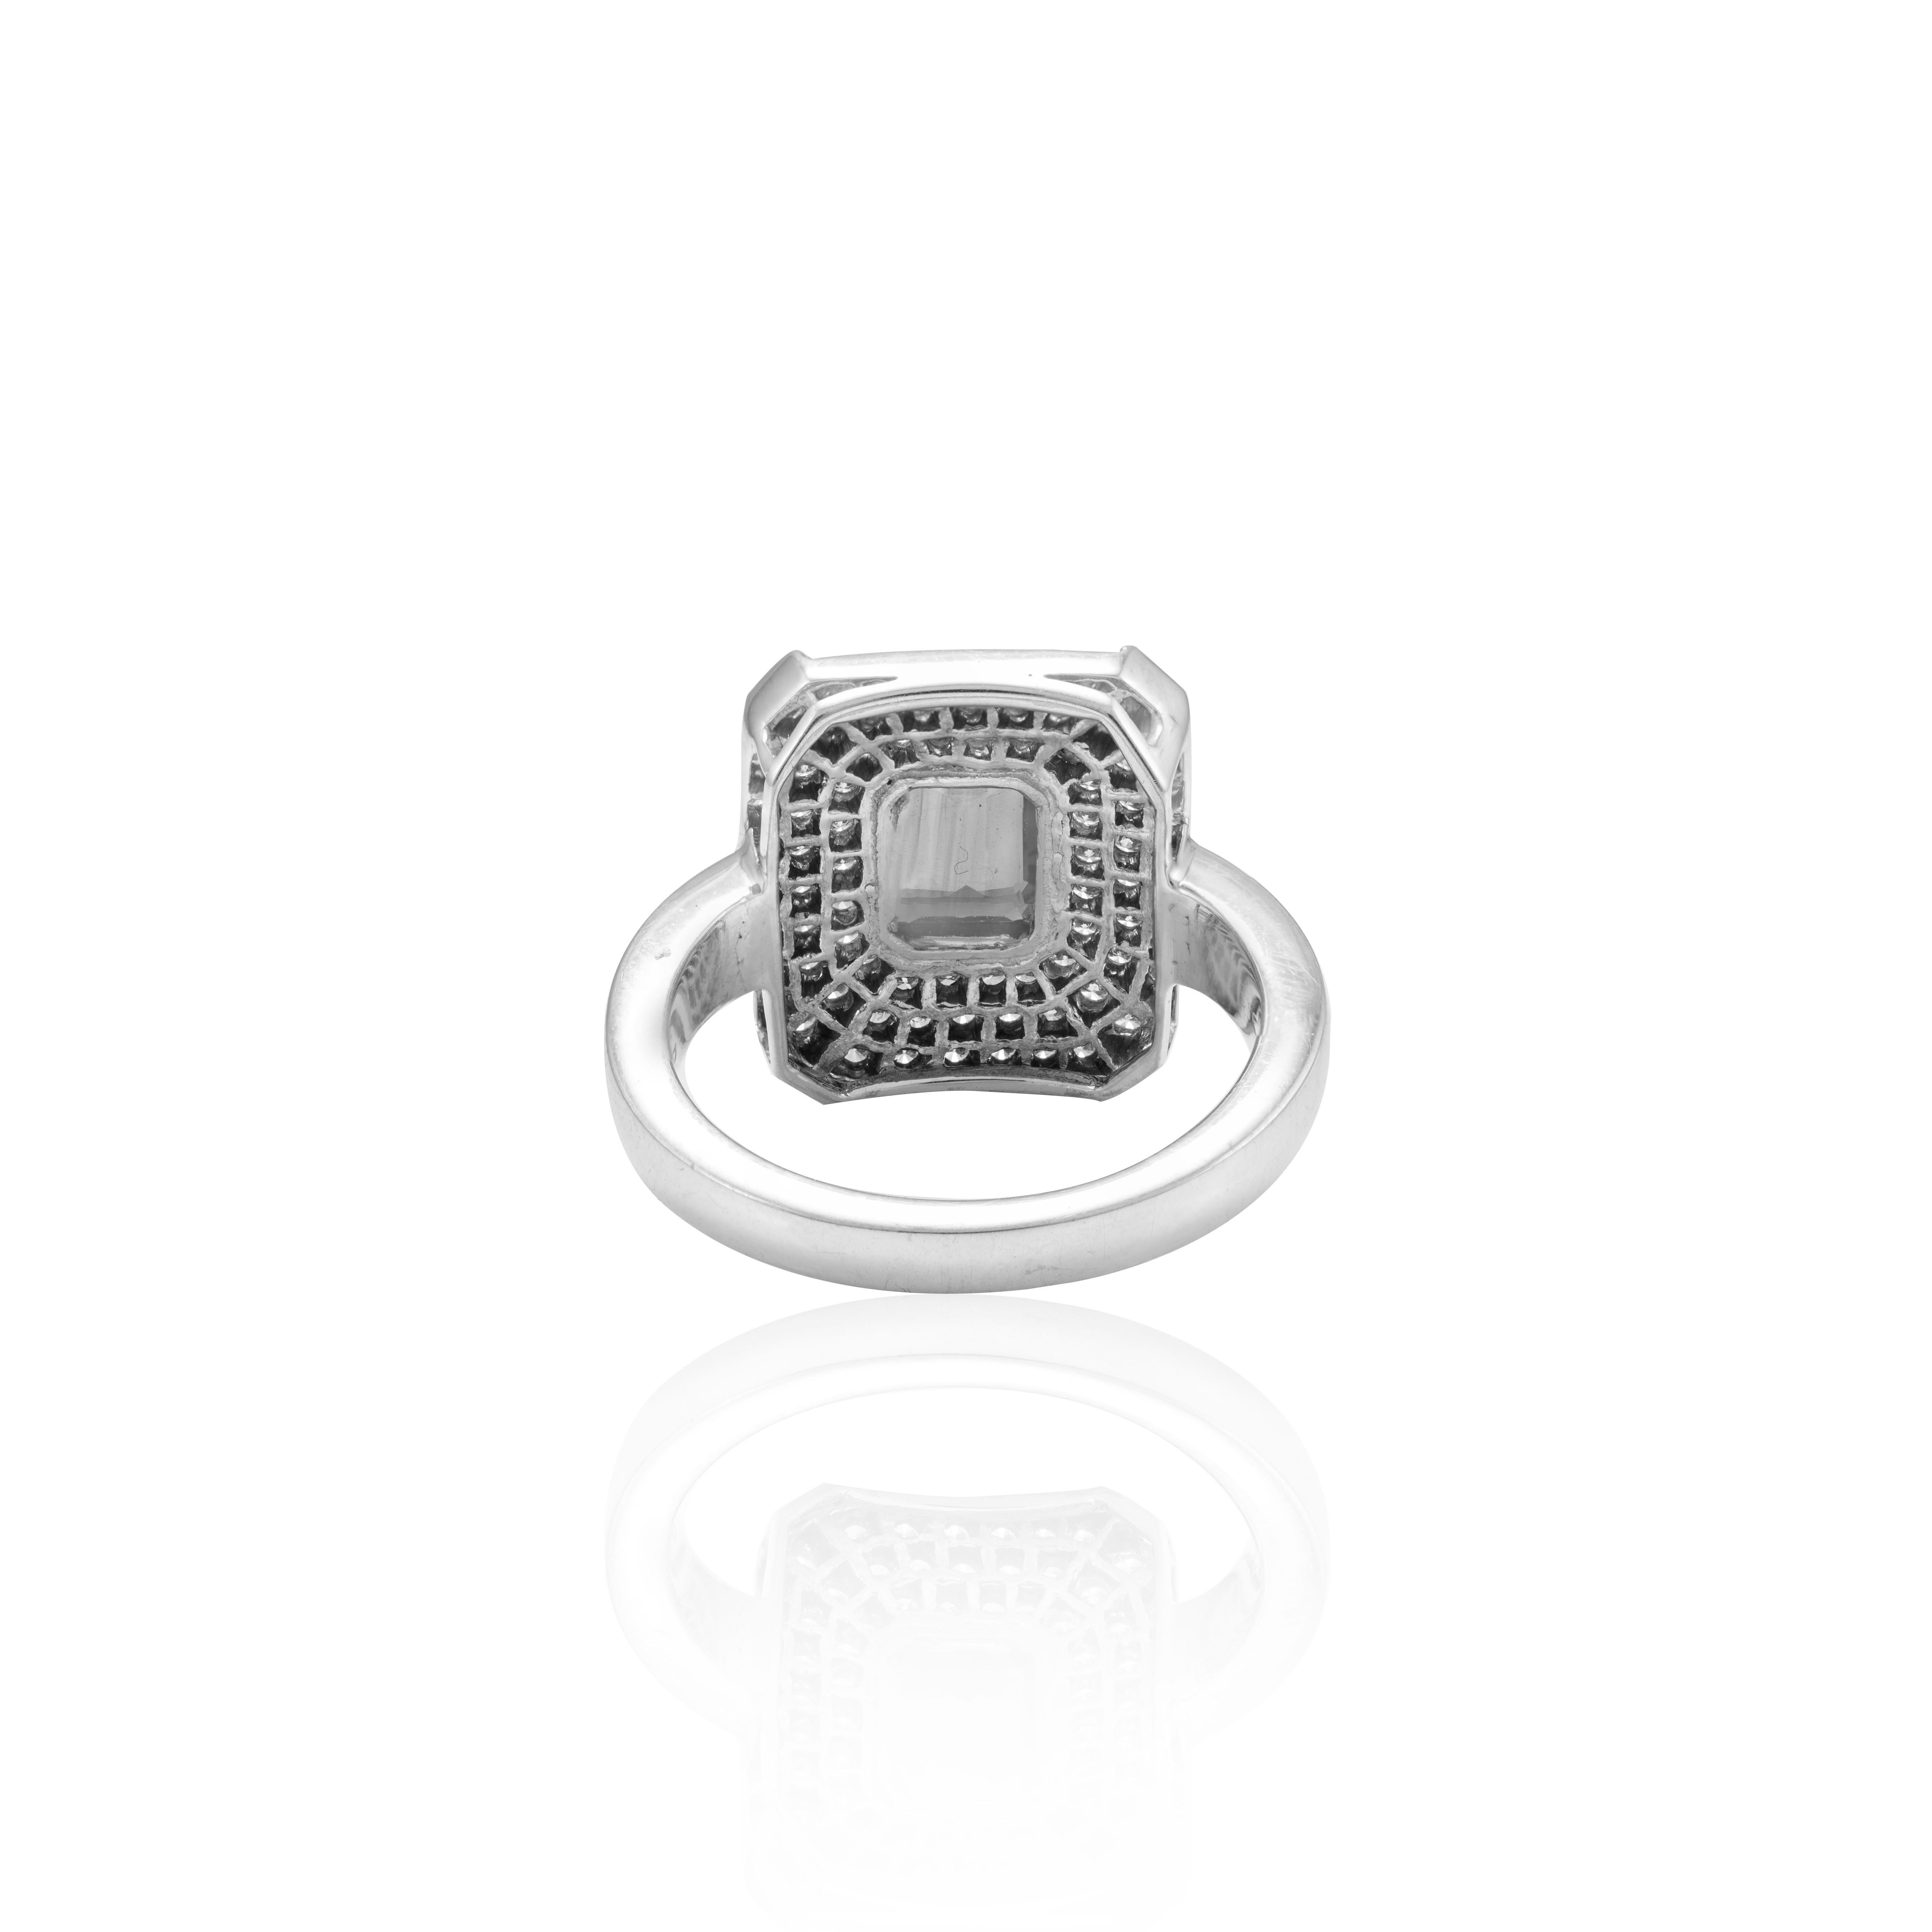 For Sale:  Exquisite Diamond and Emerald Cut Blue Sapphire Ring in 18k Solid White Gold 6